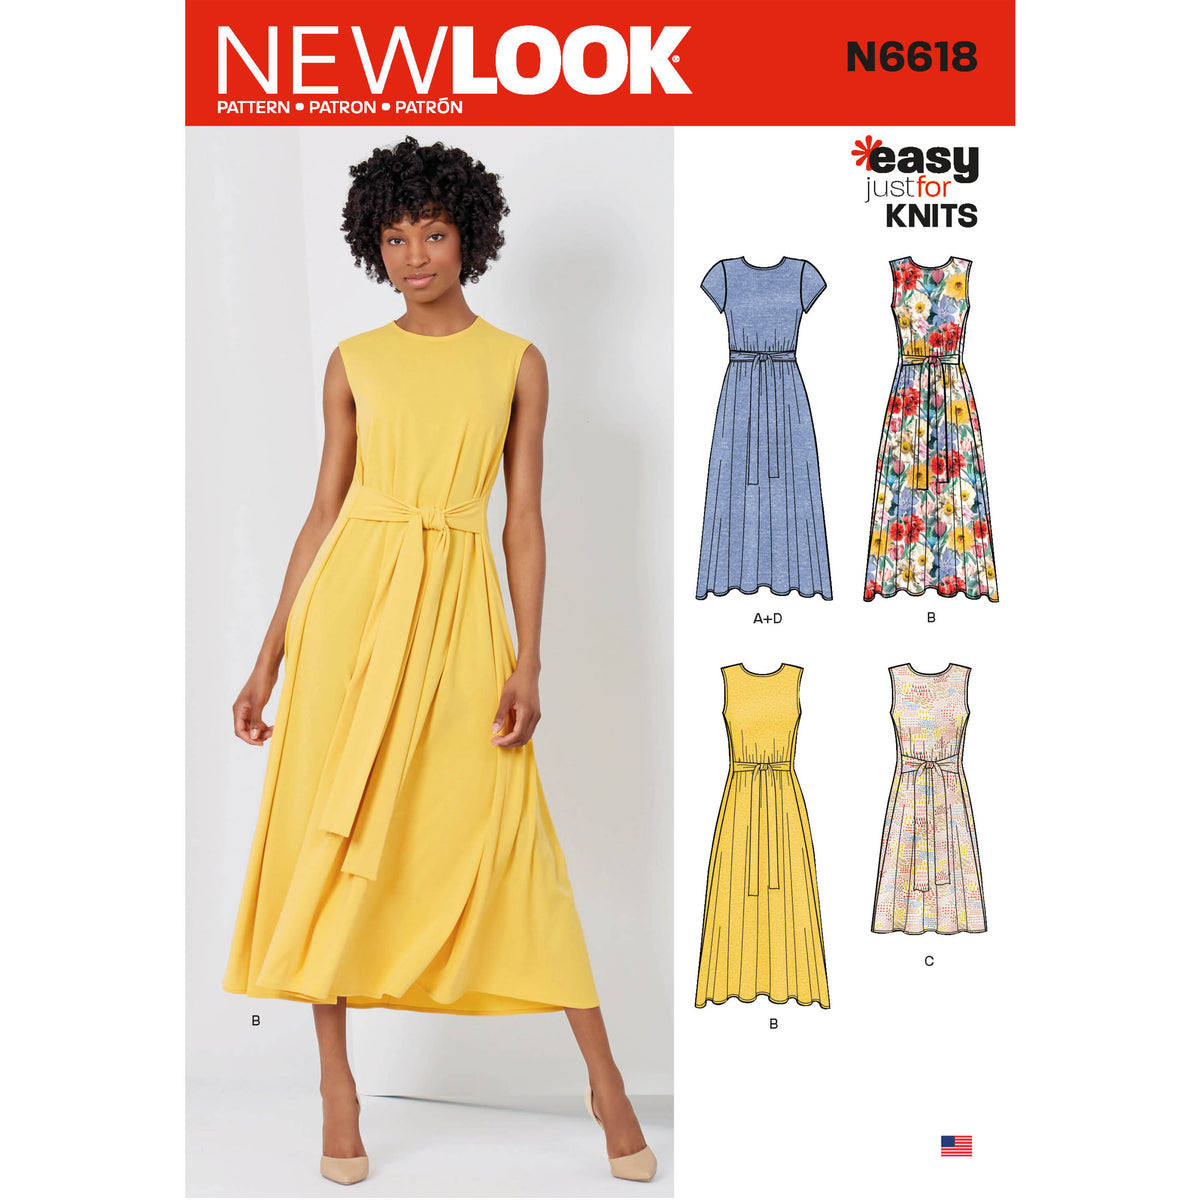 6618 New Look Sewing Pattern N6618 Misses' Dresses In Two Lengths